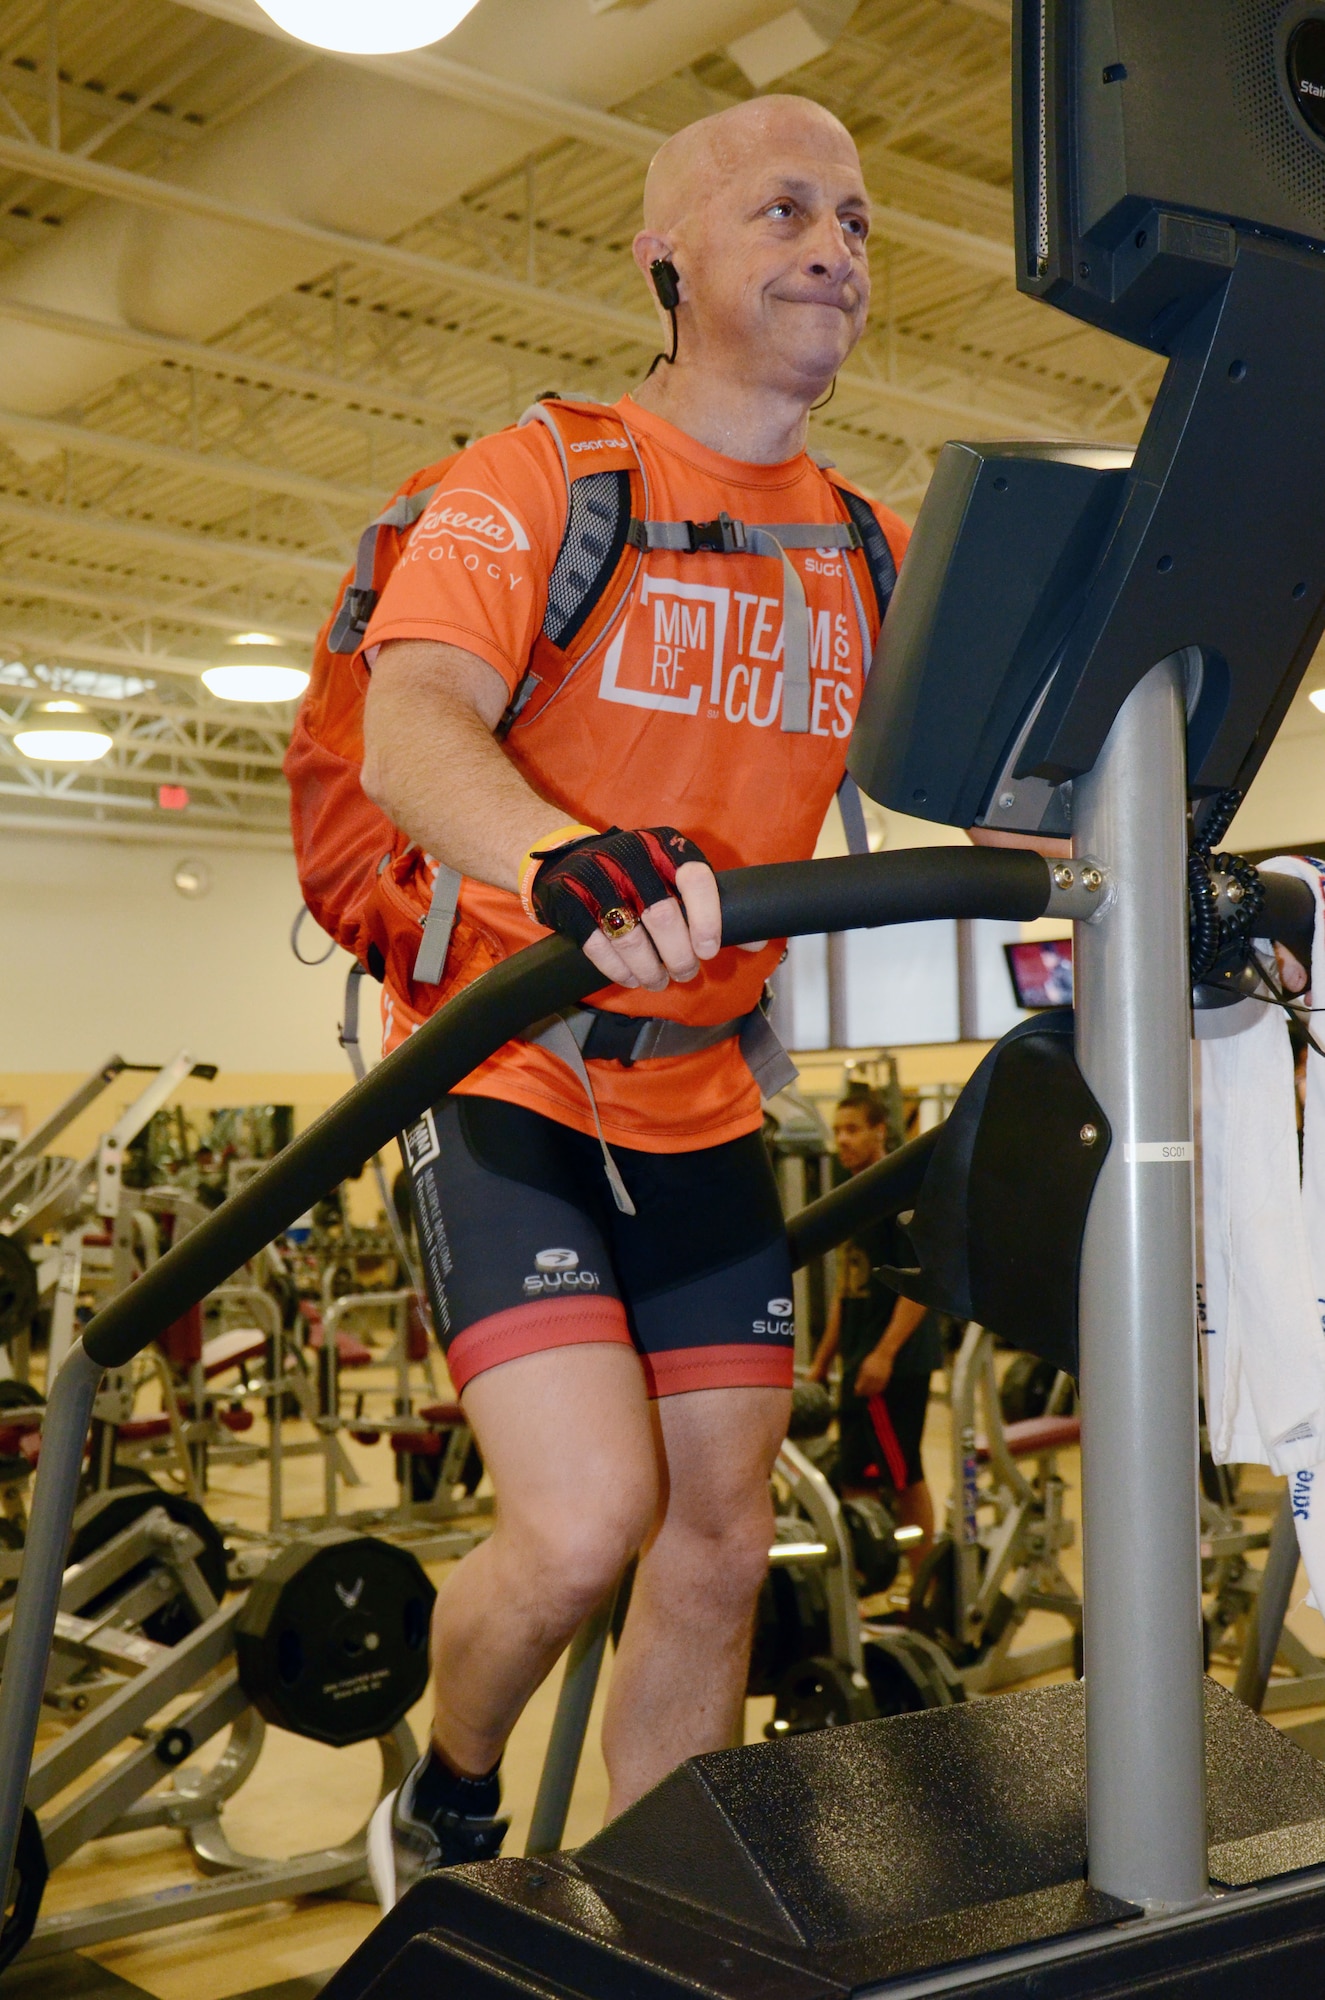 U.S. Air Force Lt. Col. retired Gary Rudman, United States Air Forces Central Command Safety deputy director, climbs a stair machine at Shaw Air Force Base, S.C., Dec. 14, 2016. Rudman is conditioning his body to prepare for his climb in February to Mount Kilimanjaro, Tanzania. (U.S. Air Force photo by Tech. Sgt. Jim Araos/Released)